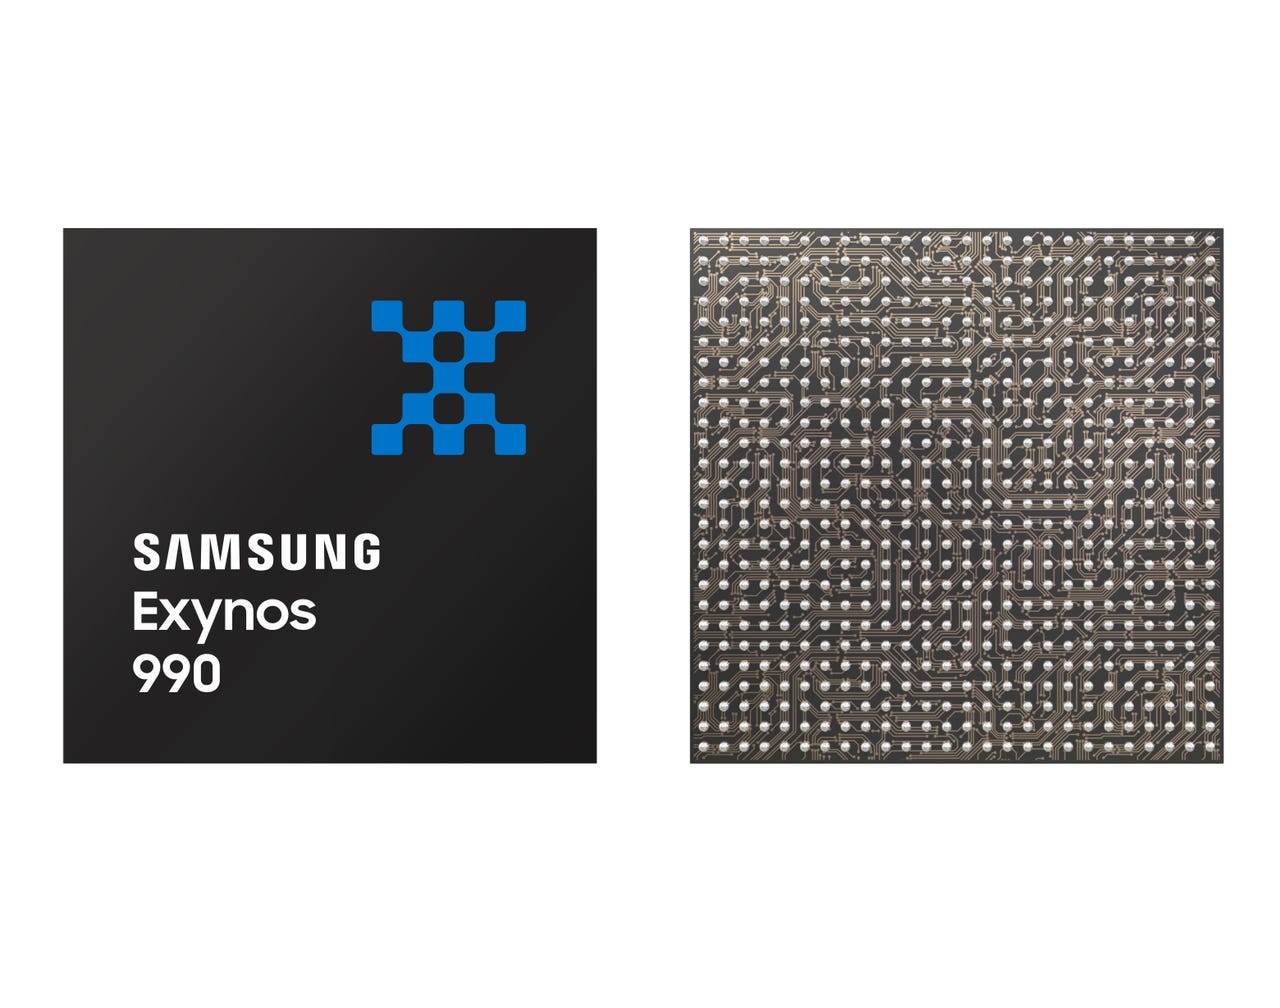 exynos-990-front-and-back.jpg